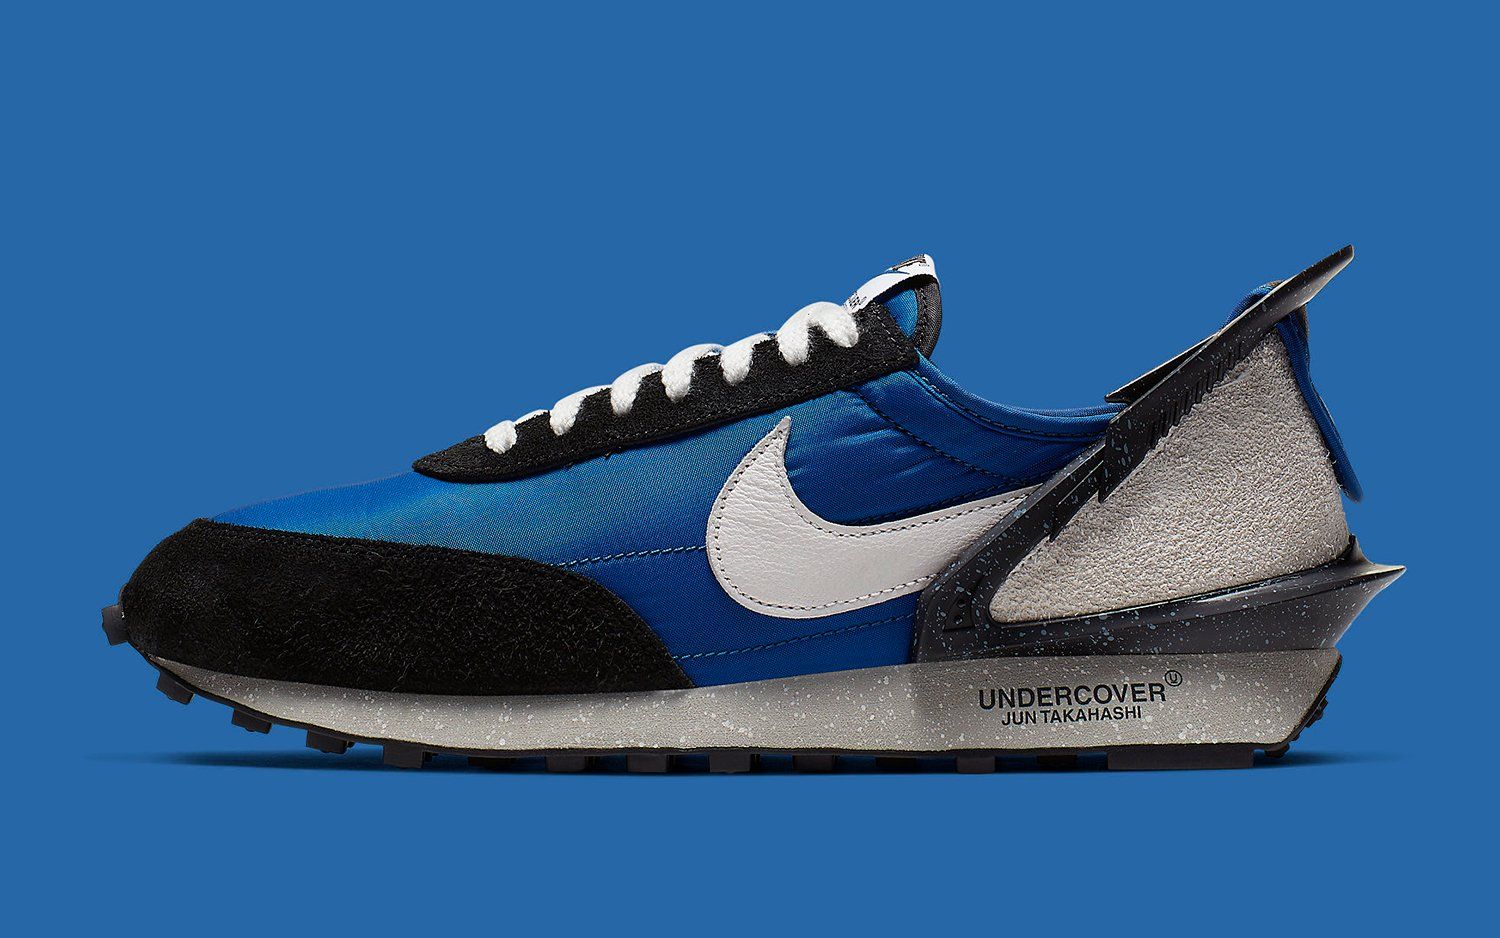 Feel bad volatility construction The Undercover x Nike Daybreak Releases Next Weekend | HOUSE OF HEAT